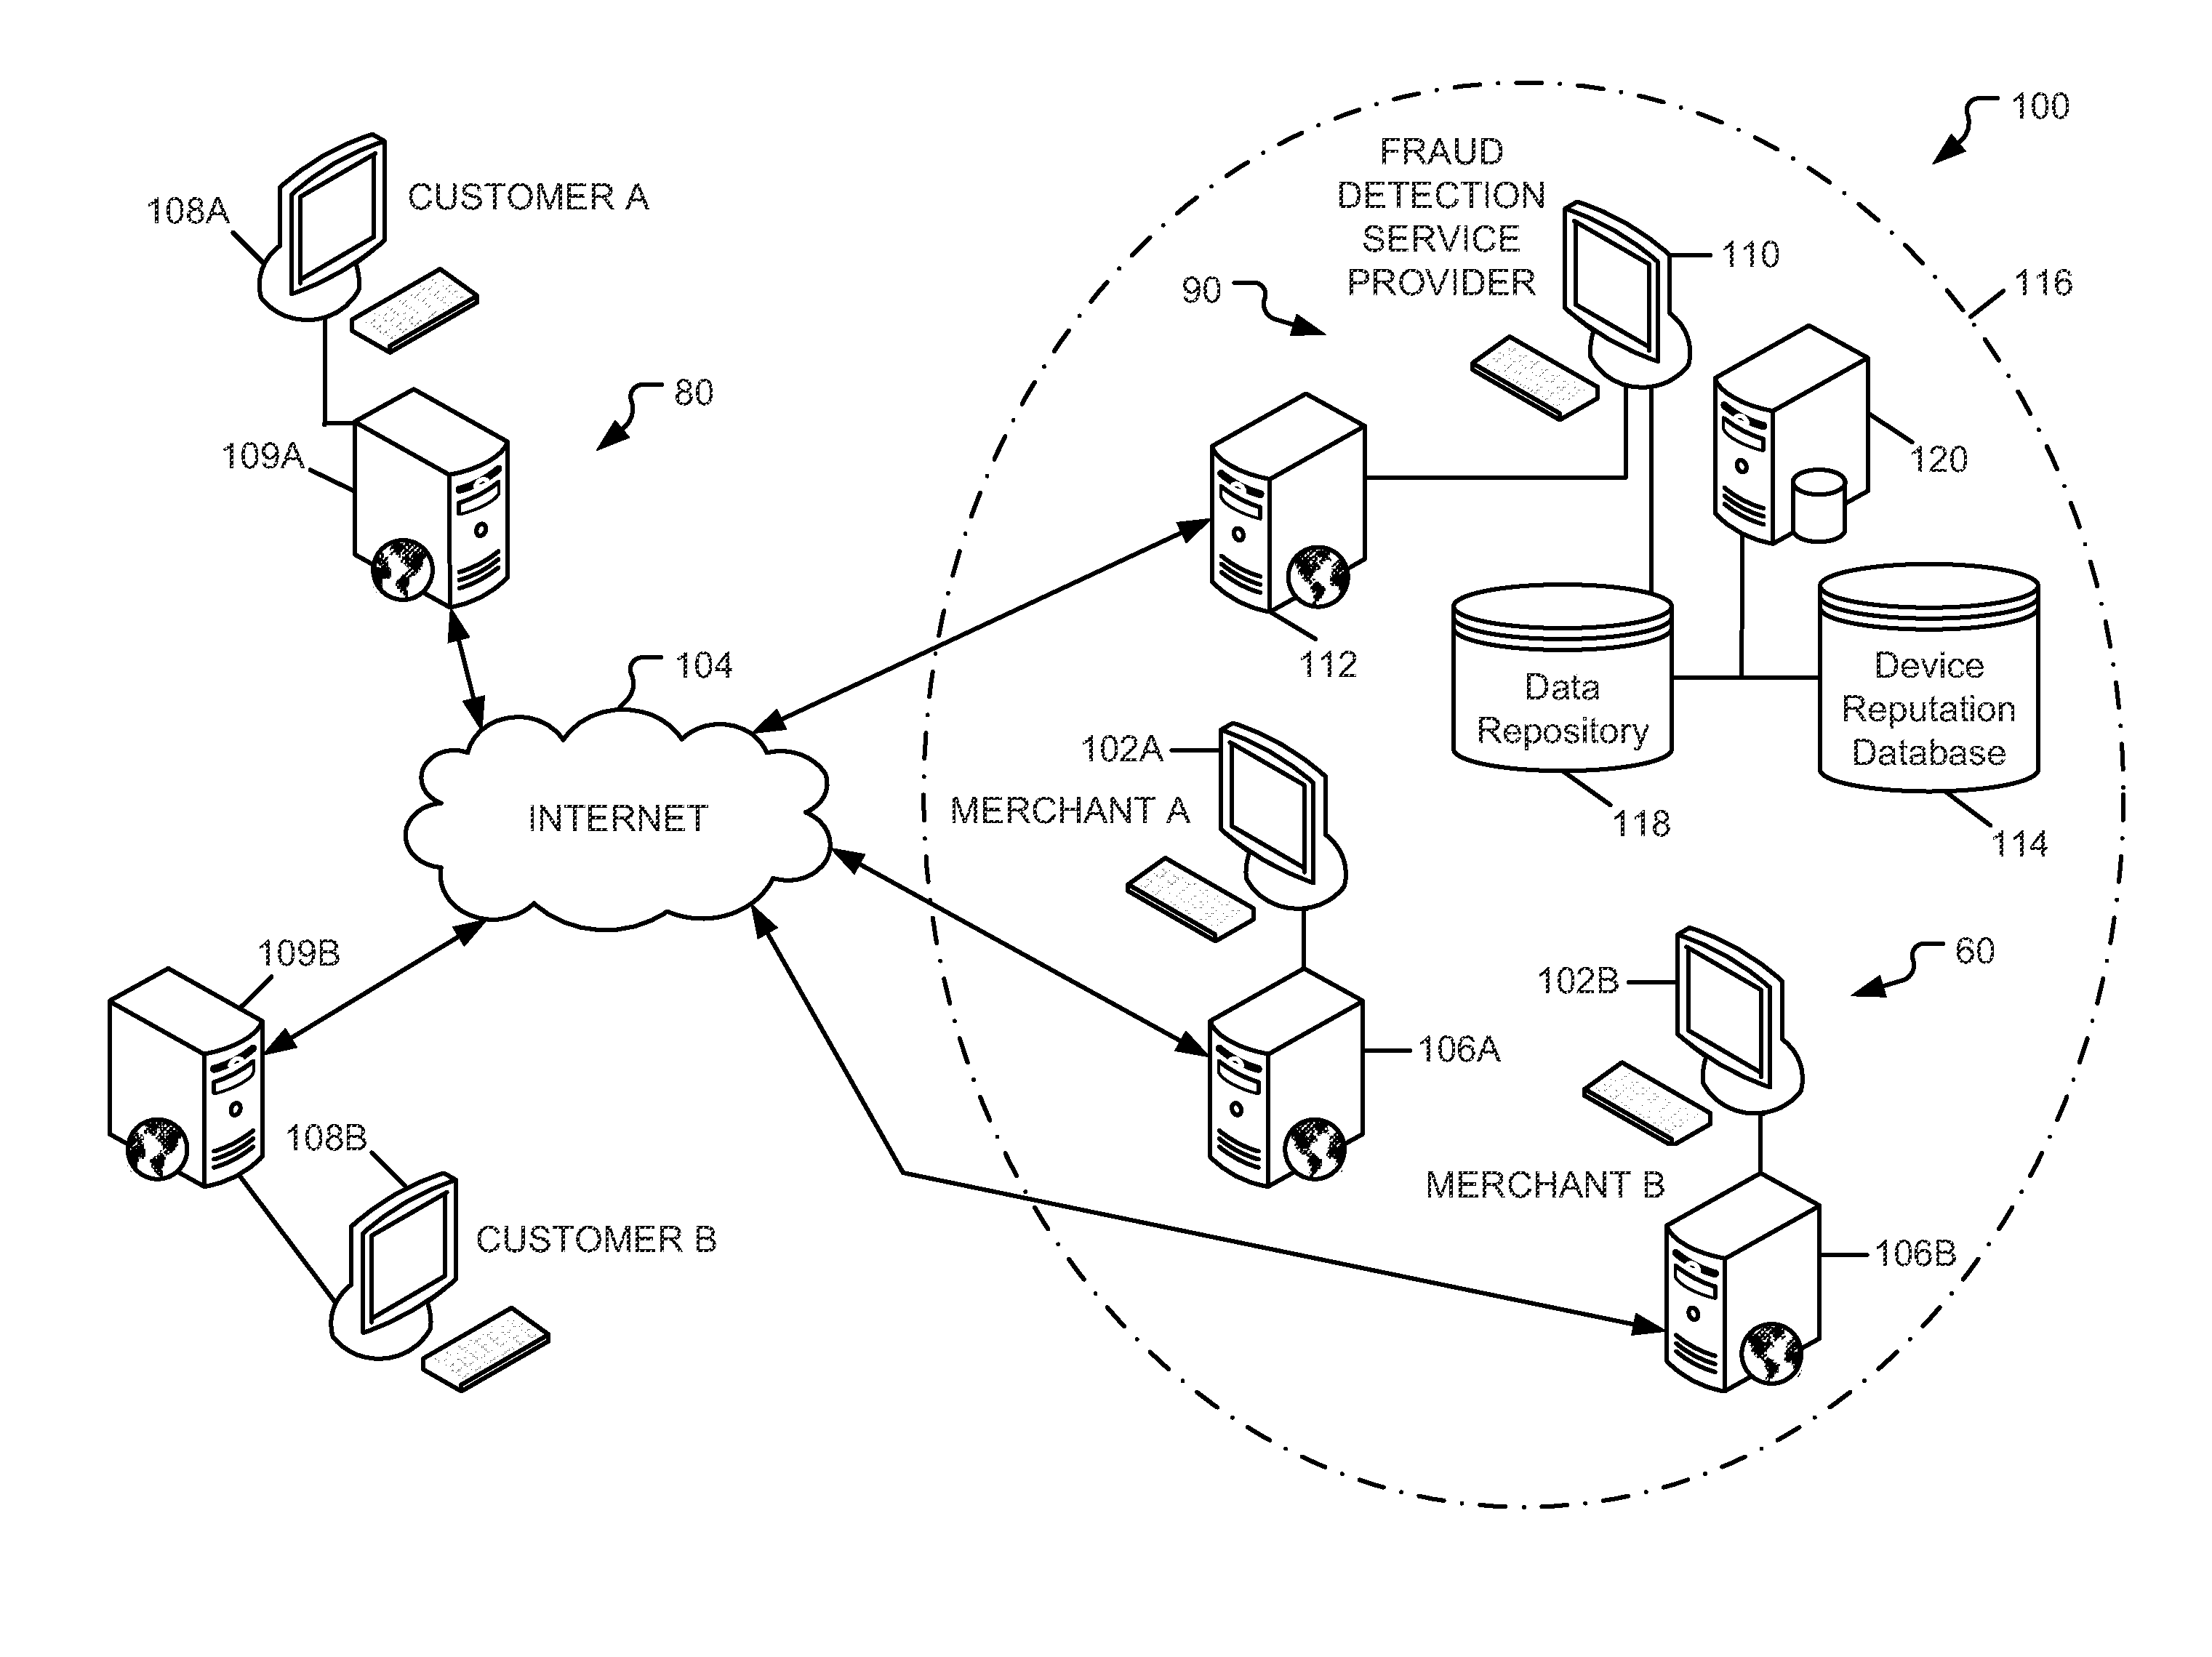 System and method for evaluating risk in fraud prevention